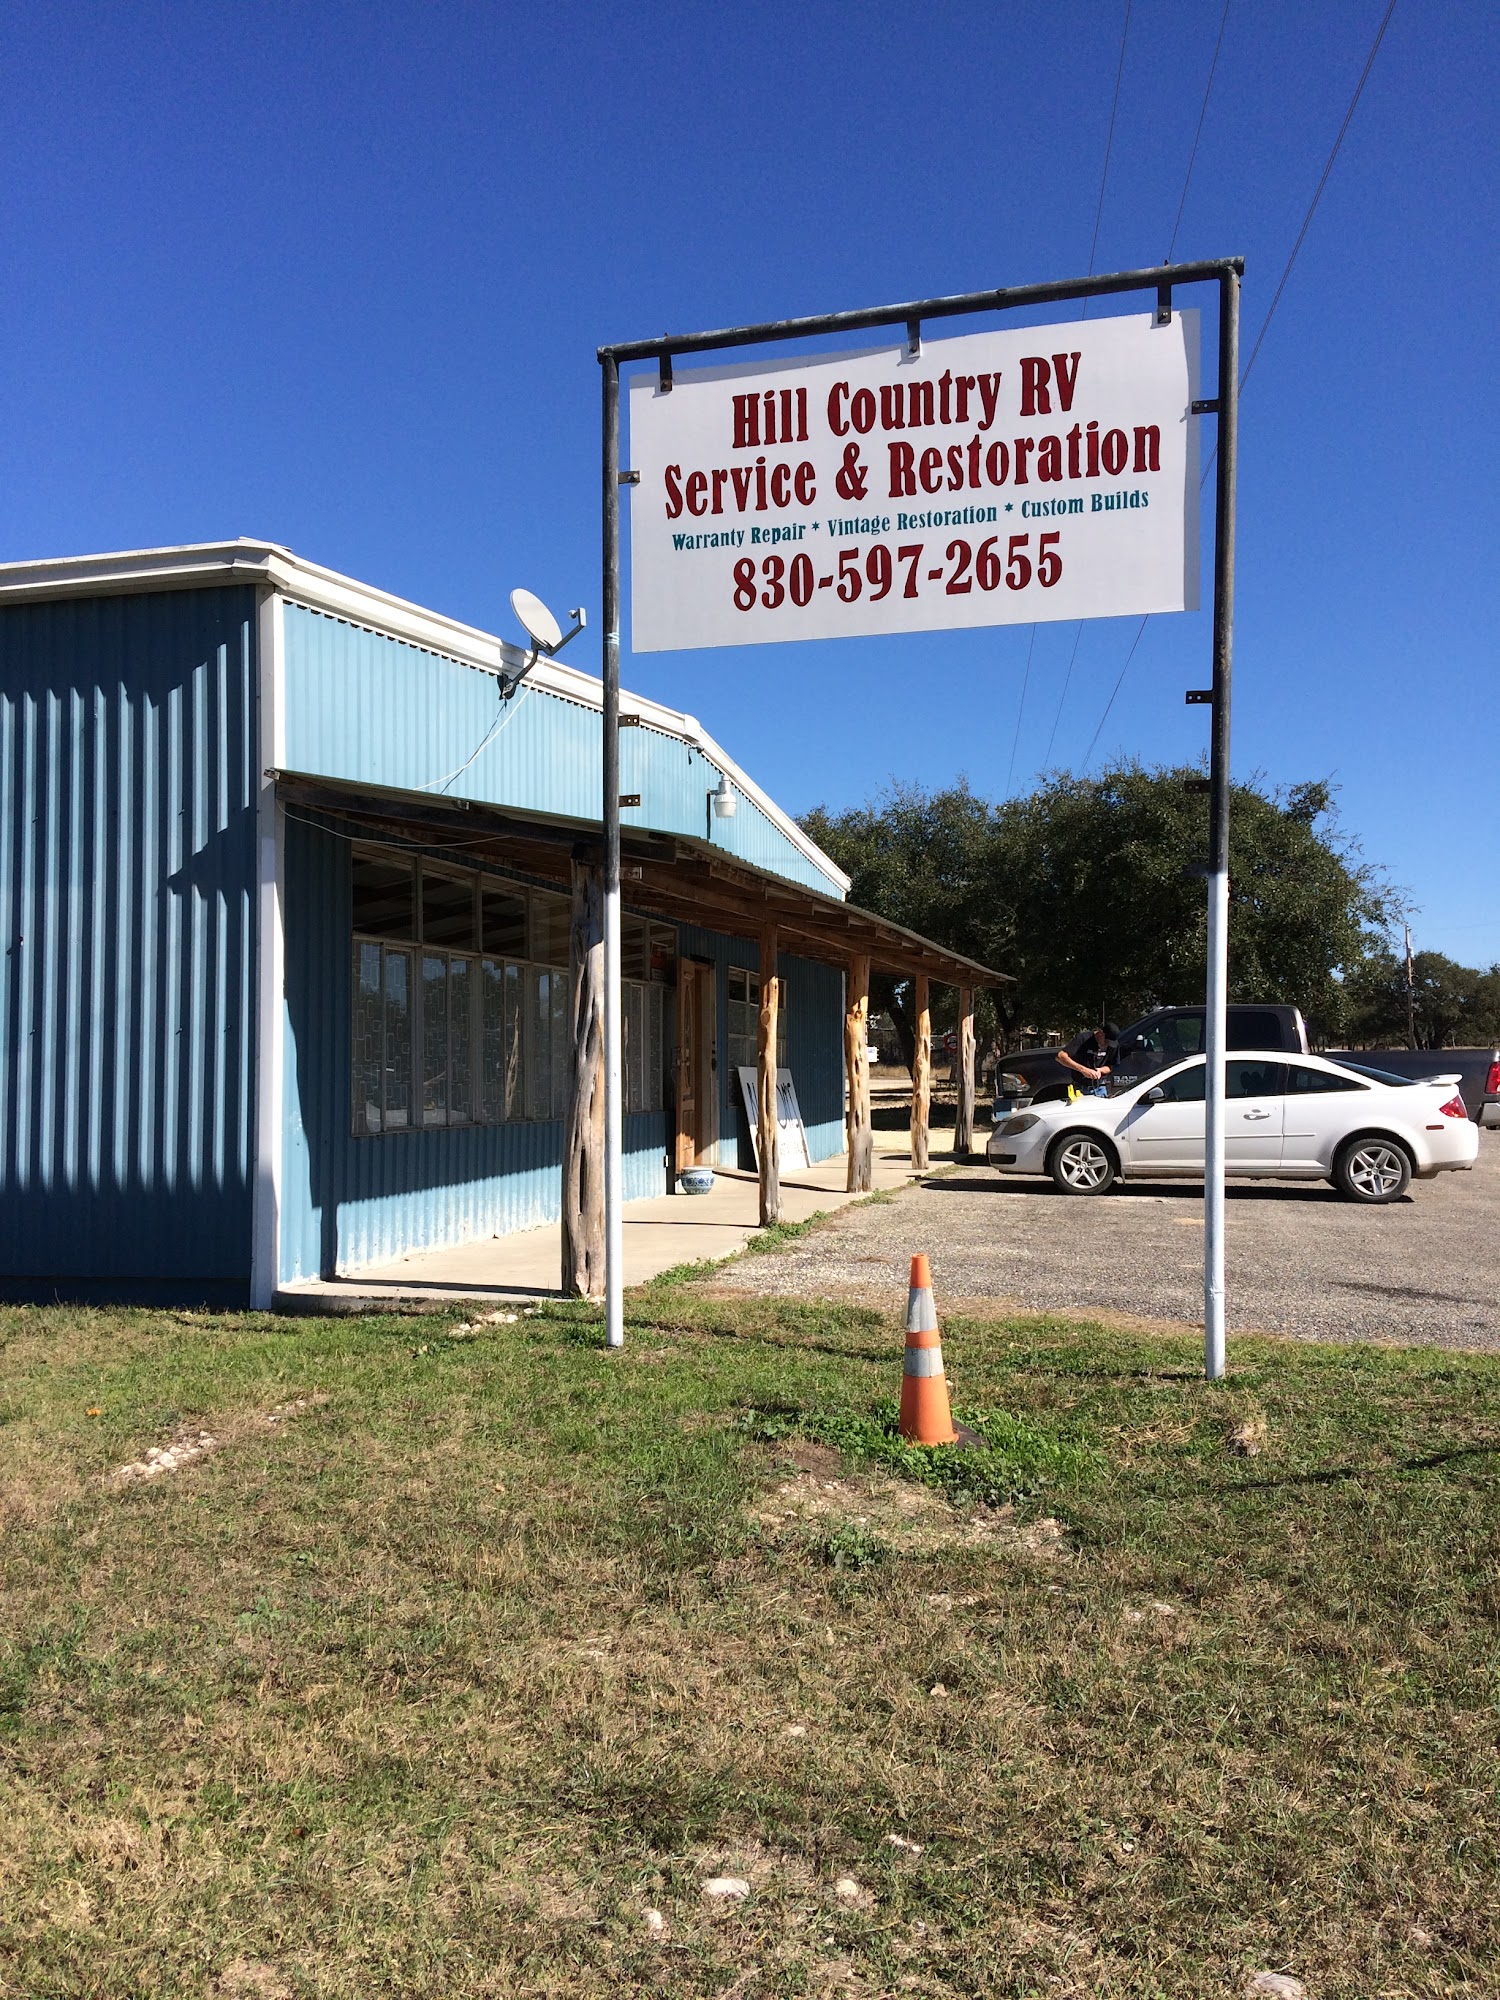 Hill Country RV & Restoration 500 E 4th St, Camp Wood Texas 78833